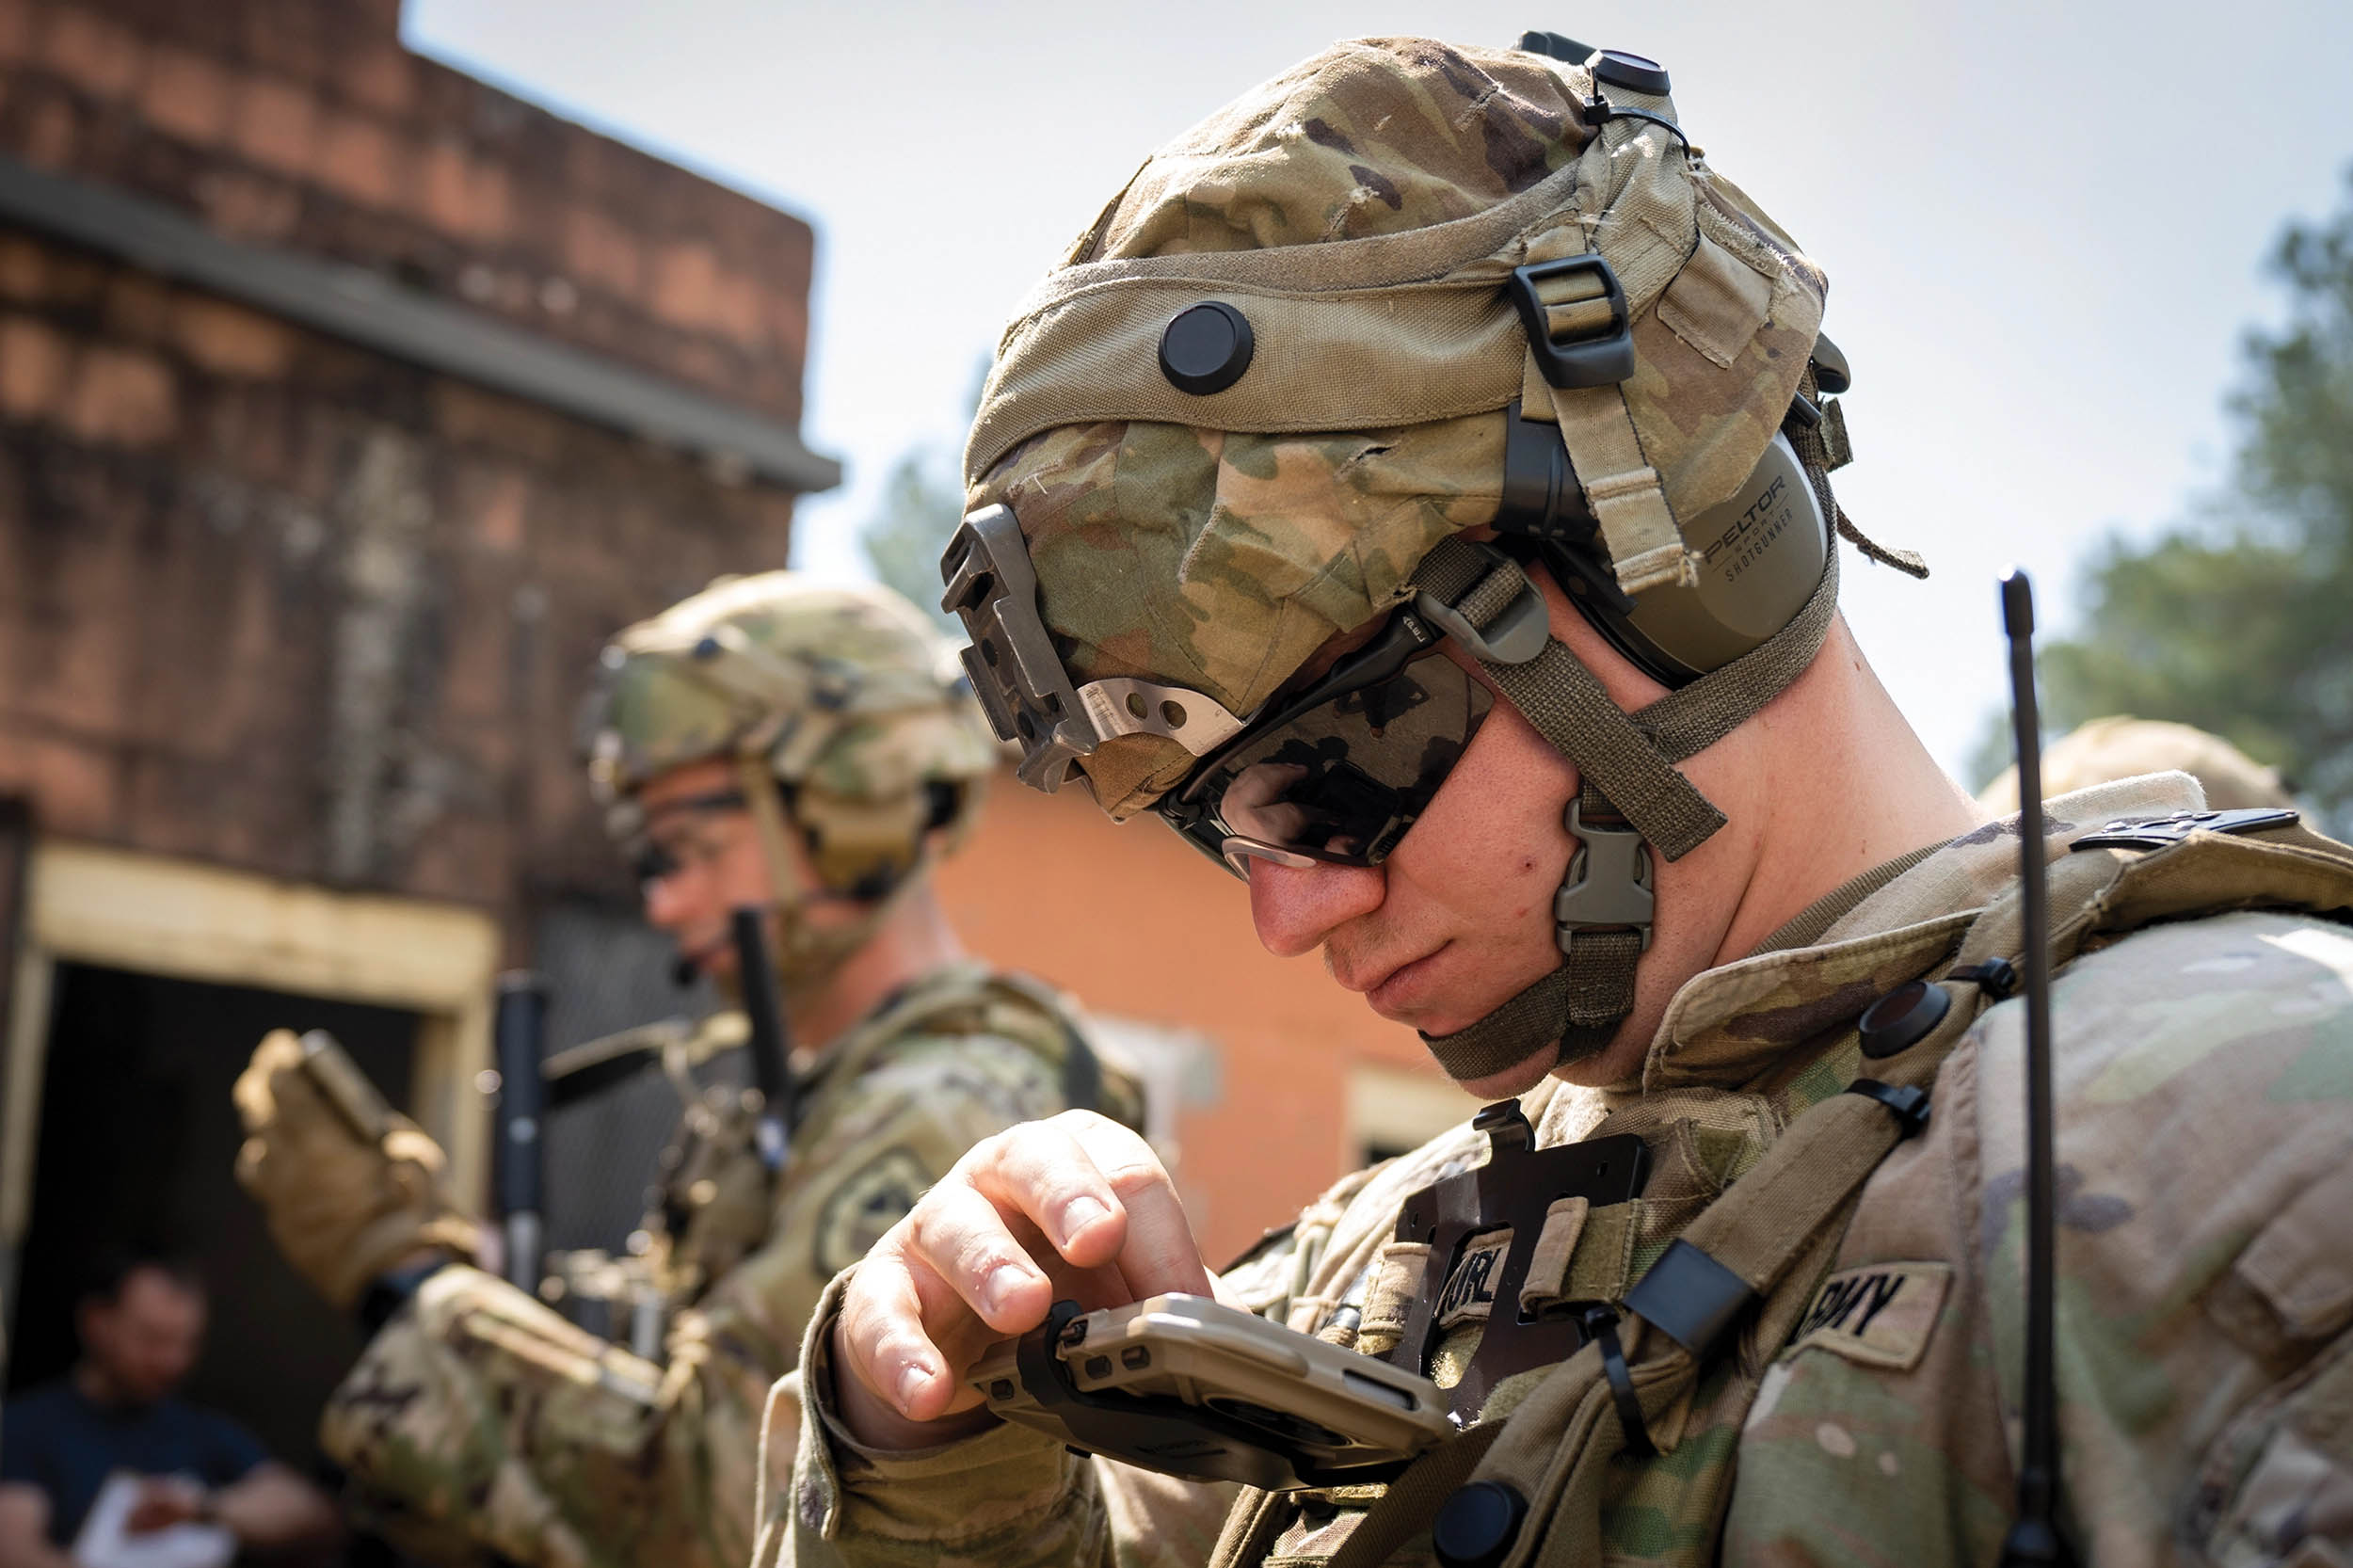 Soldiers check Nett Warrior end-user devices during Army Expeditionary Warrior Experiment force-on-force field demonstration held on Fort Moore (formerly Fort Benning), Georgia, March 4, 2021 (U.S. Army/Jason Amadi)